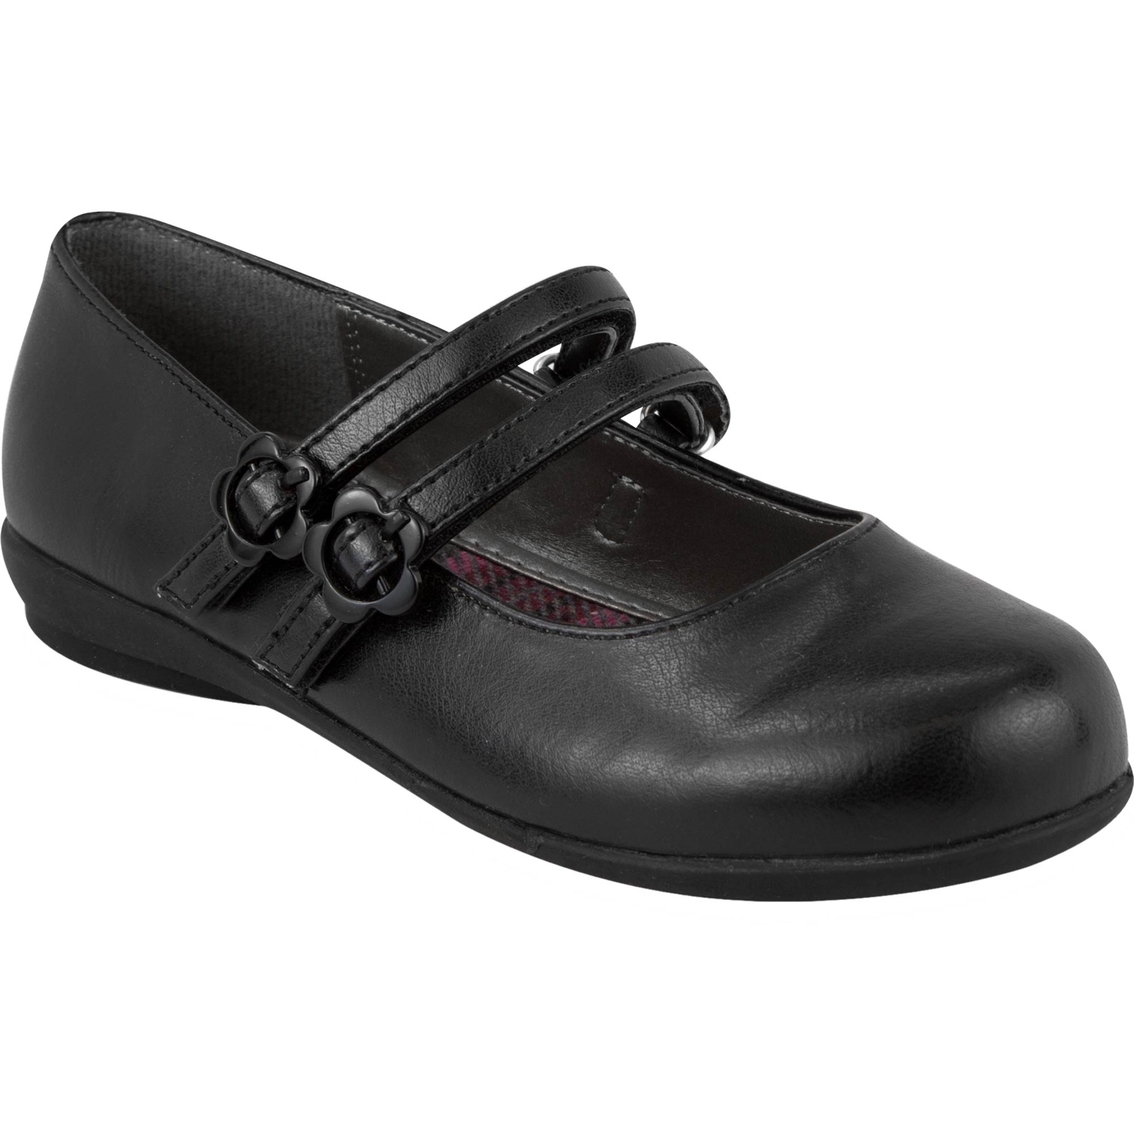 mary jane shoes with velcro strap